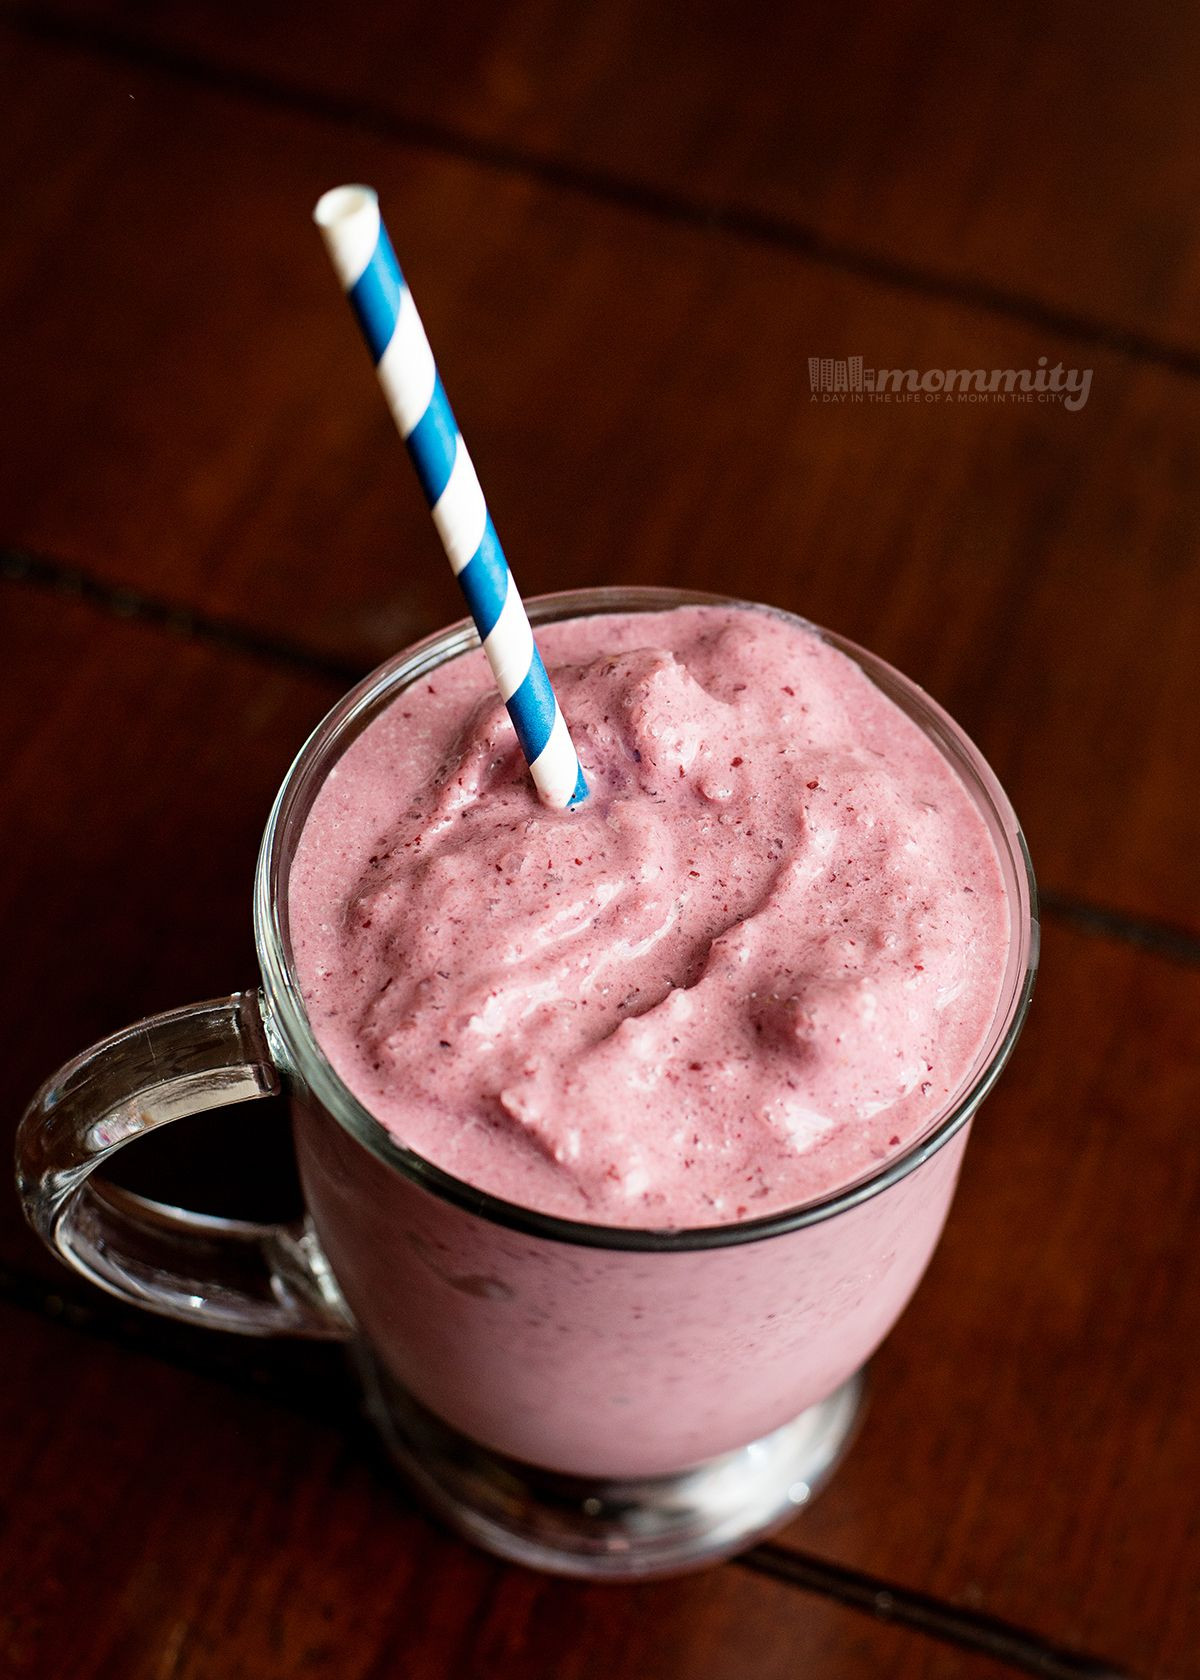 Weight Watchers Smoothies Mix Recipes
 WW Smoothie Mix Recipe Berries Vanilla & Protein With